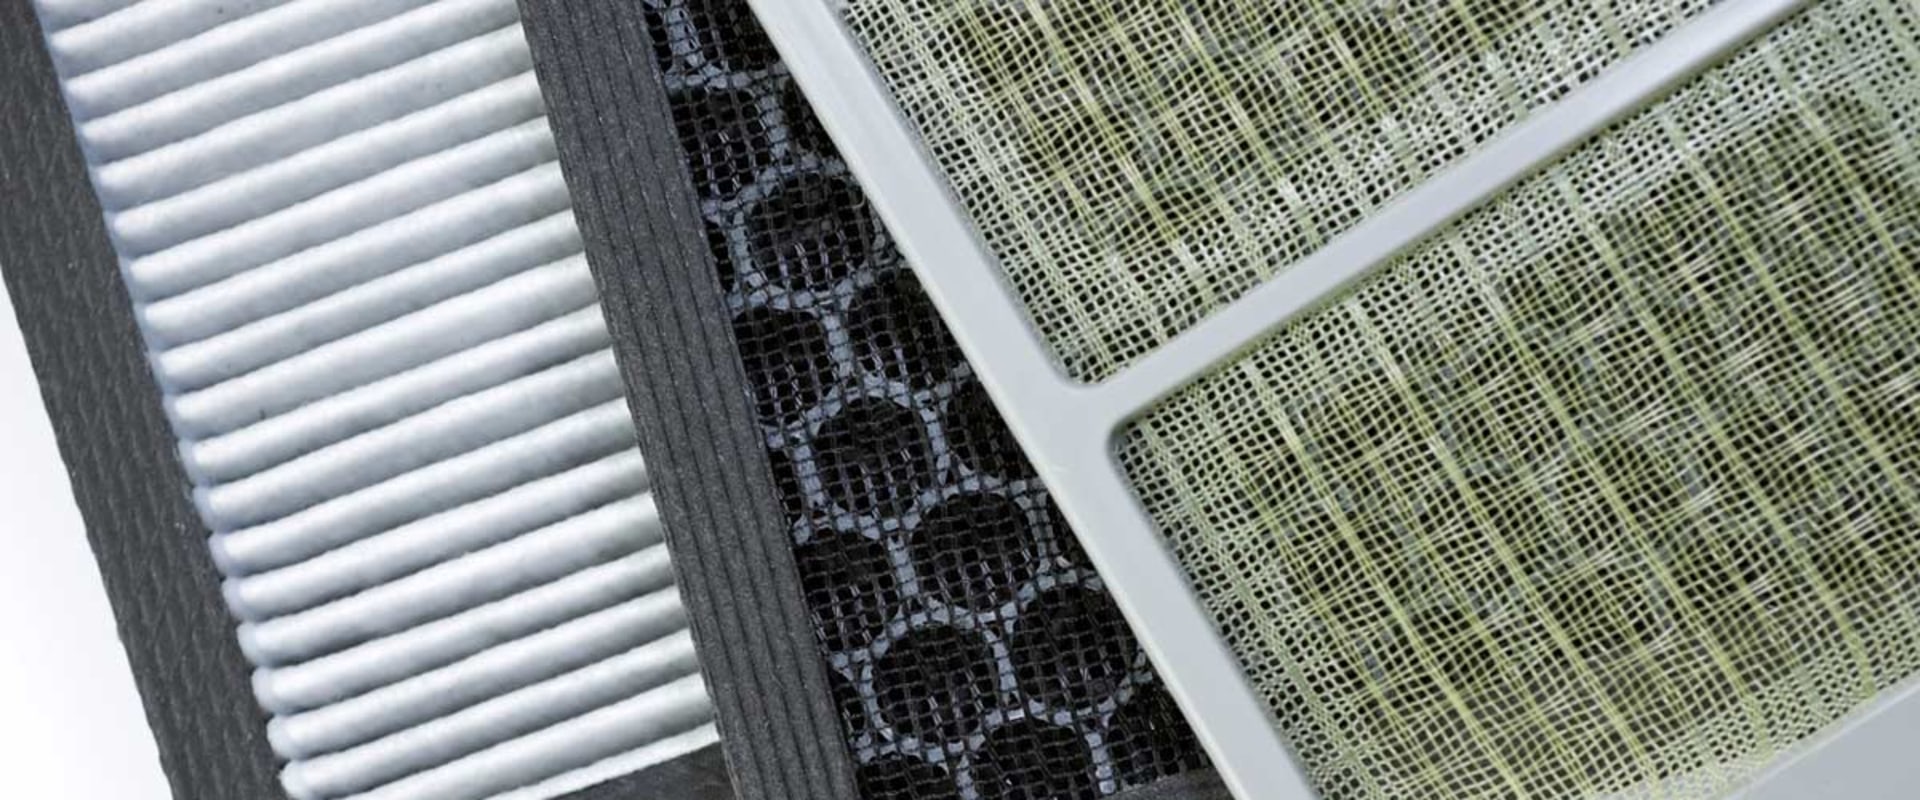 The Best HVAC Filters for Your Home